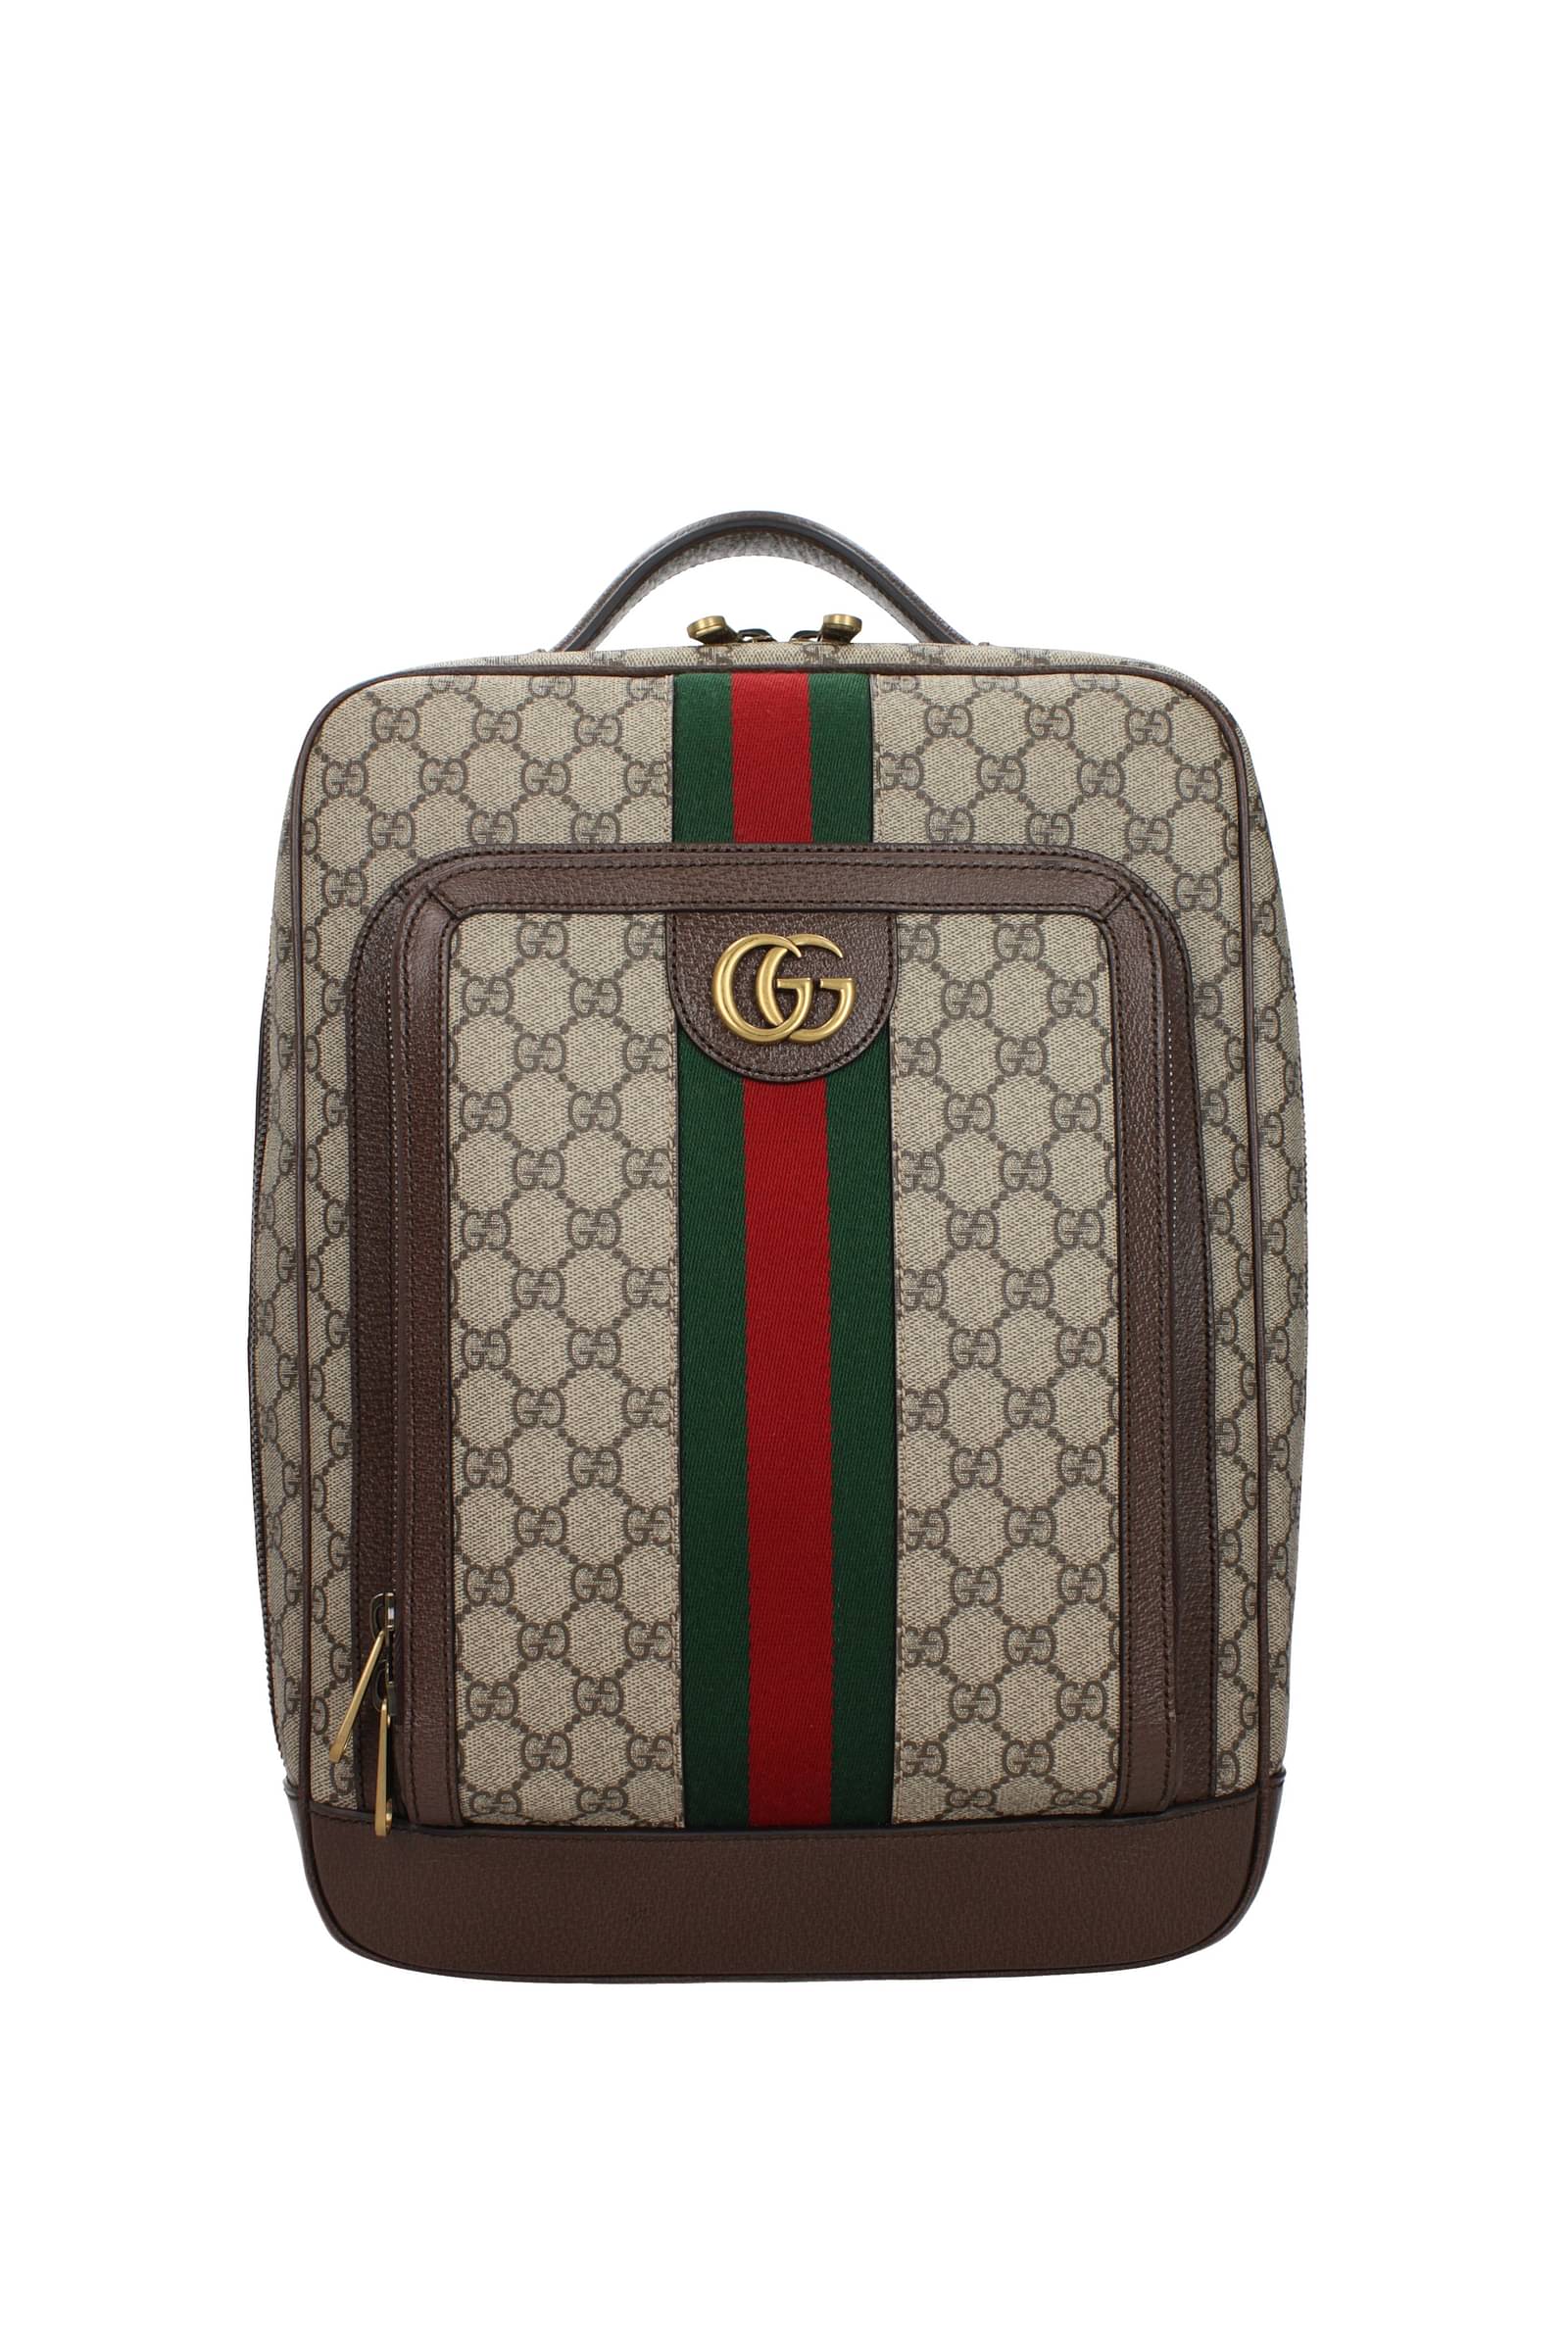 Gucci Backpack and bumbags ophidia Men 745718FABYY9744 